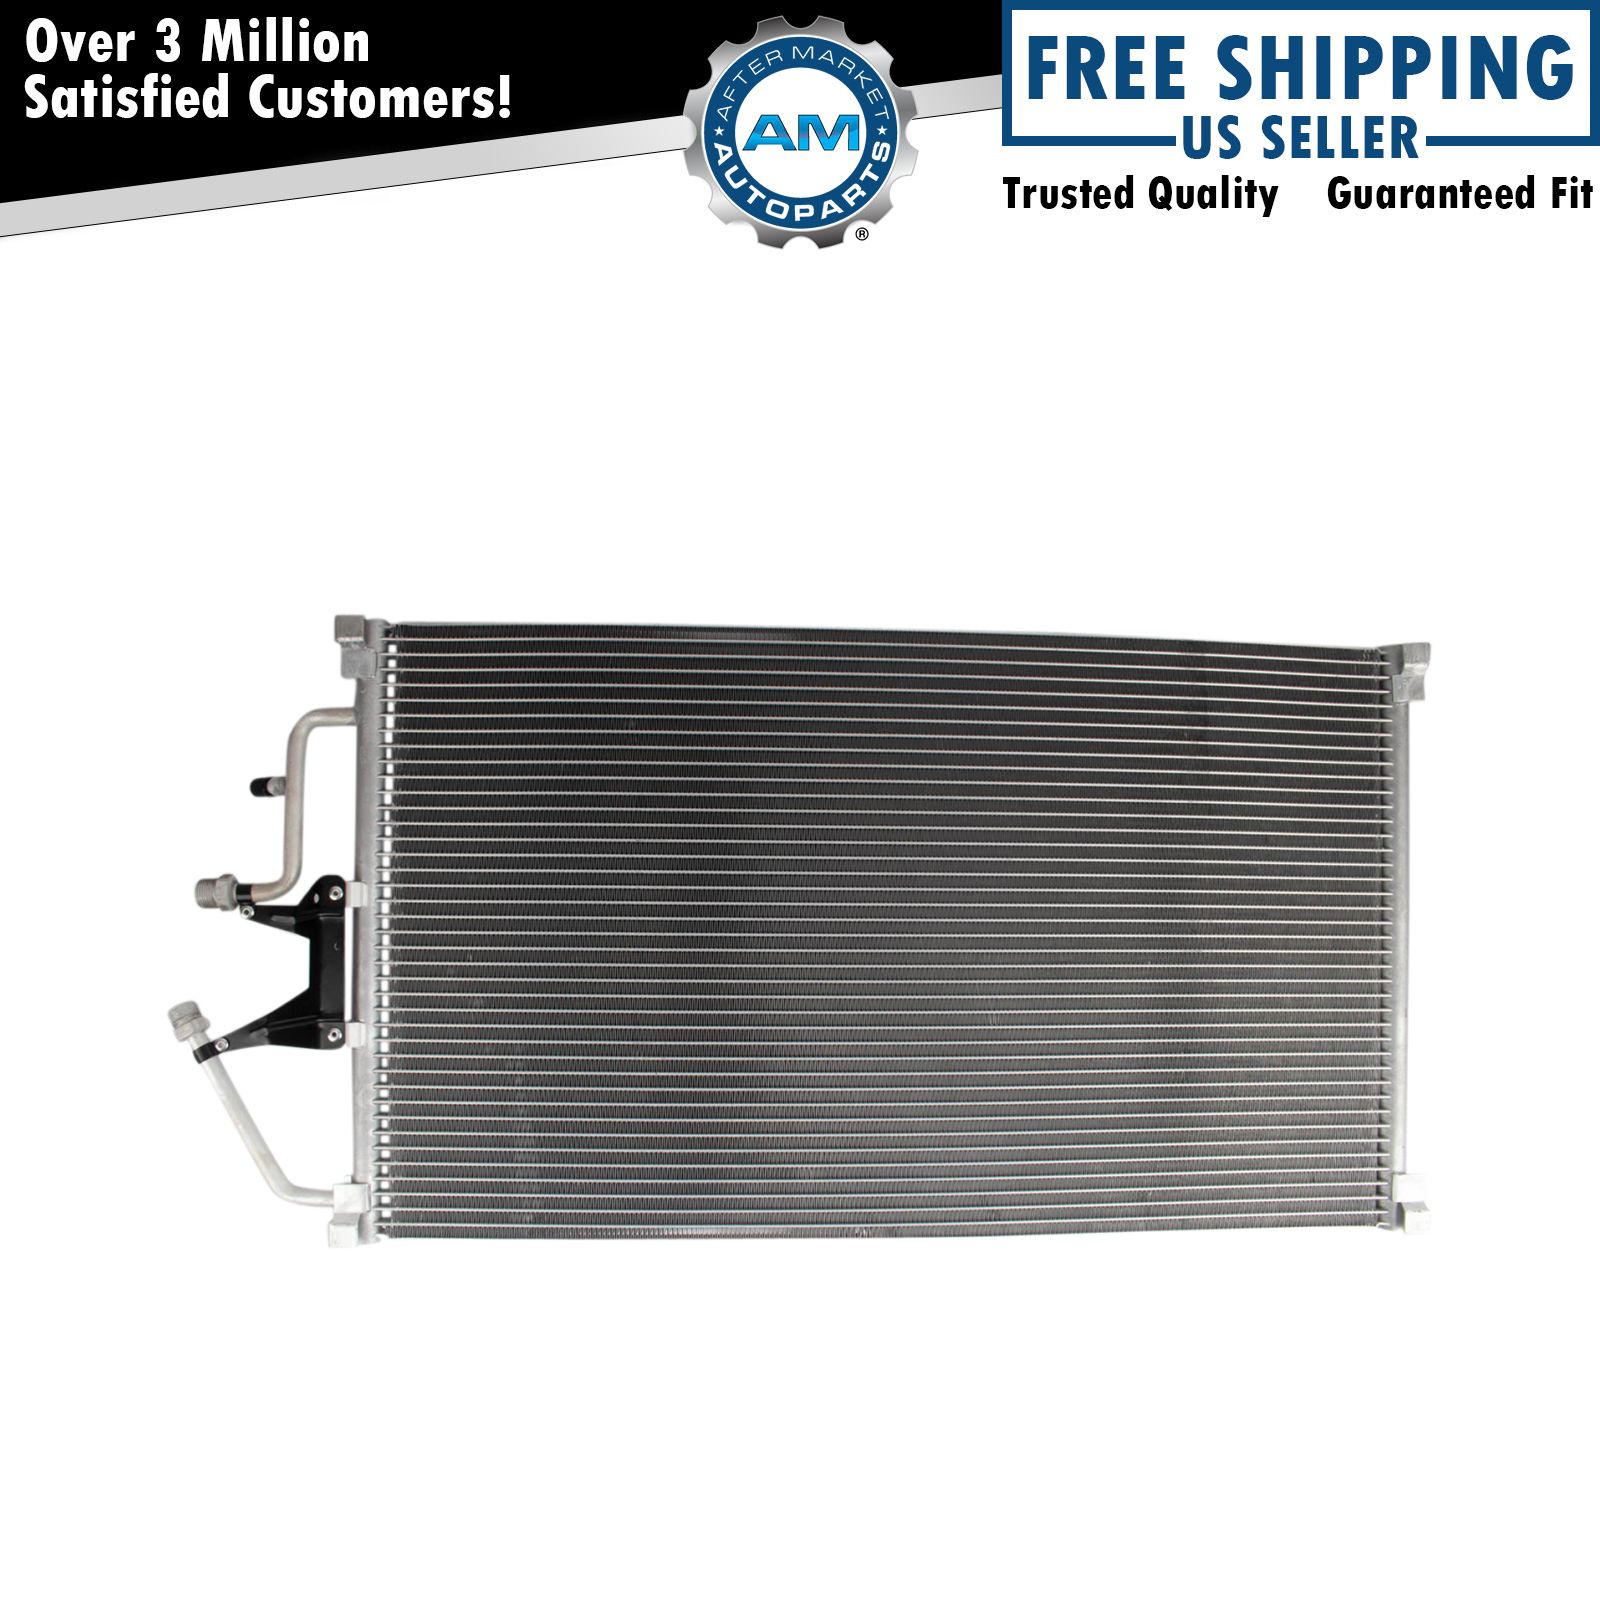 Air Conditioning A/C Condenser Fits 1999-2000 Cadillac 1994-2002 Chevrolet GMC